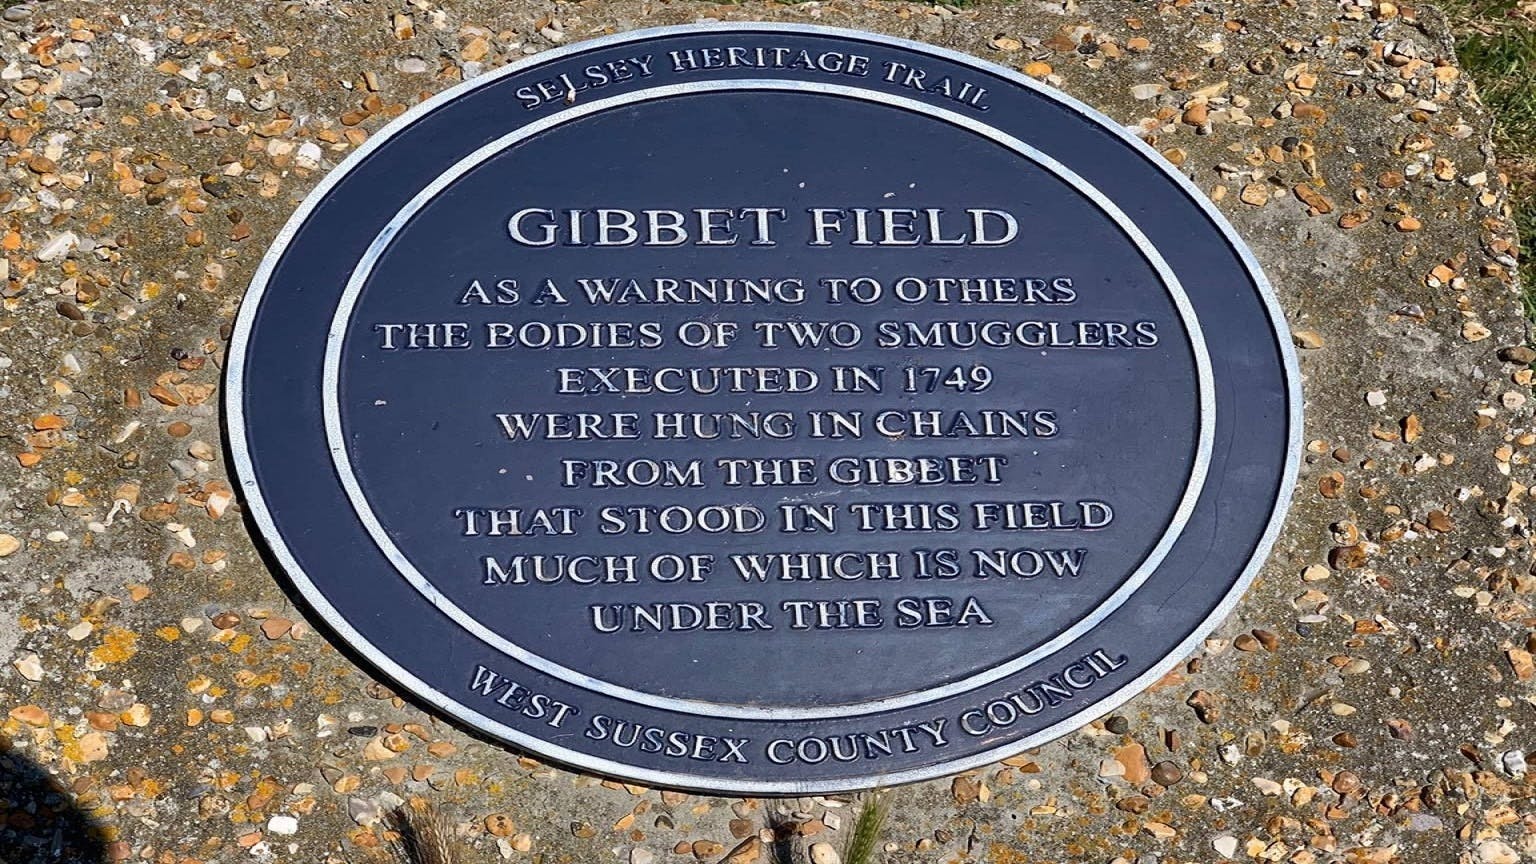 Blue plaque commemorating the hanging of two smugglers at Gibbet Field 